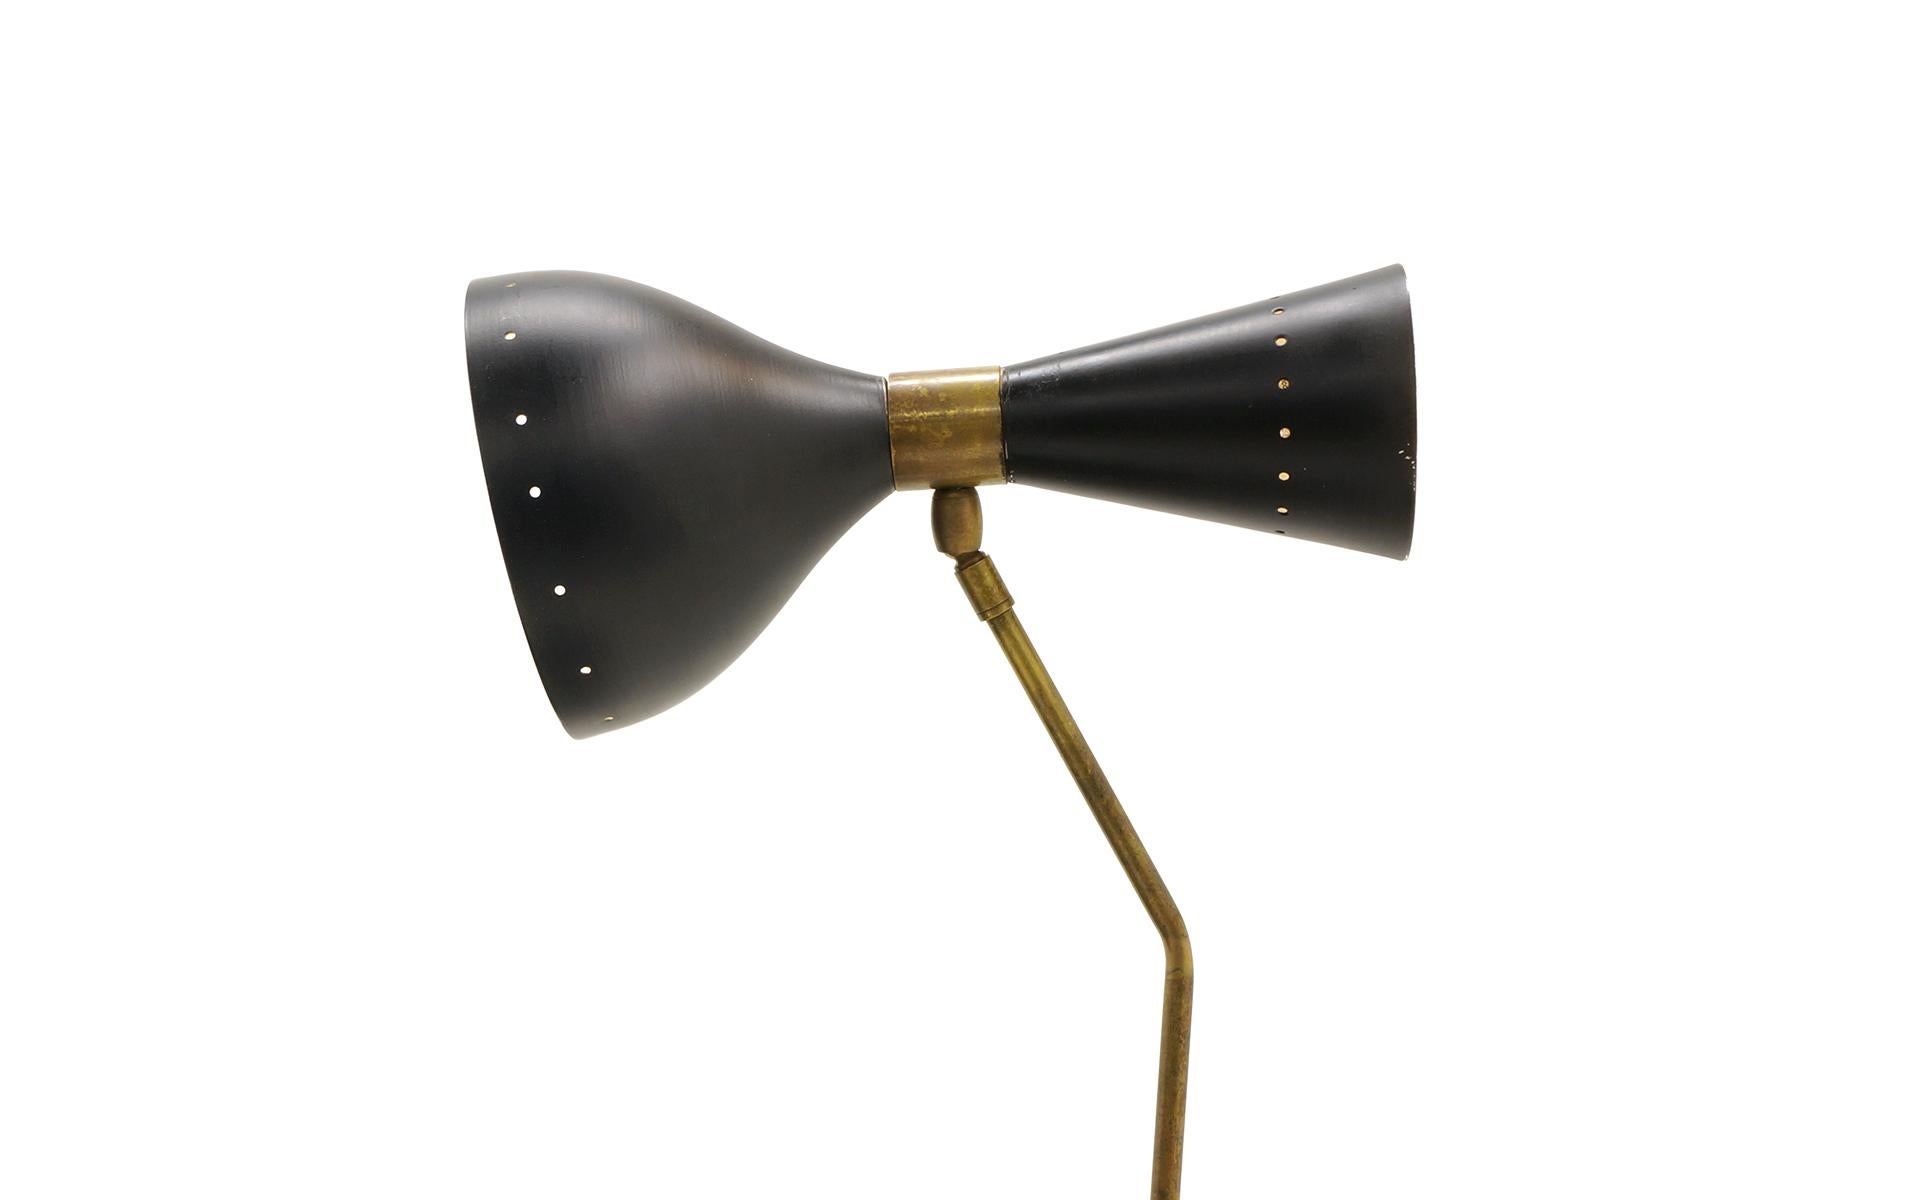 Italian Brass Table Lamp with Counter Balance by Stilnova Adjustable Height & Direction